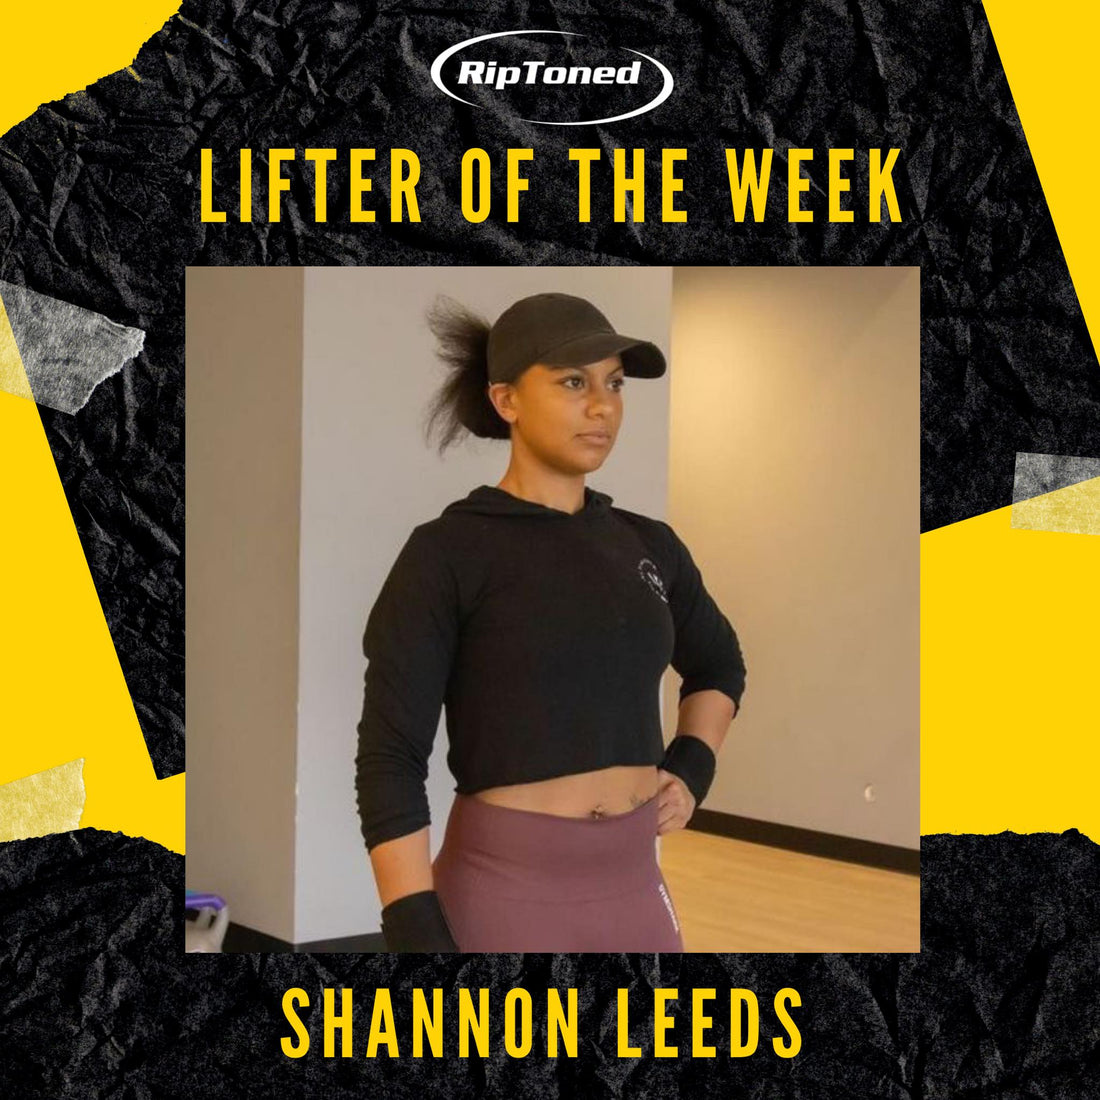 Lifter of the Week - Shannon Leeds - Rip Toned